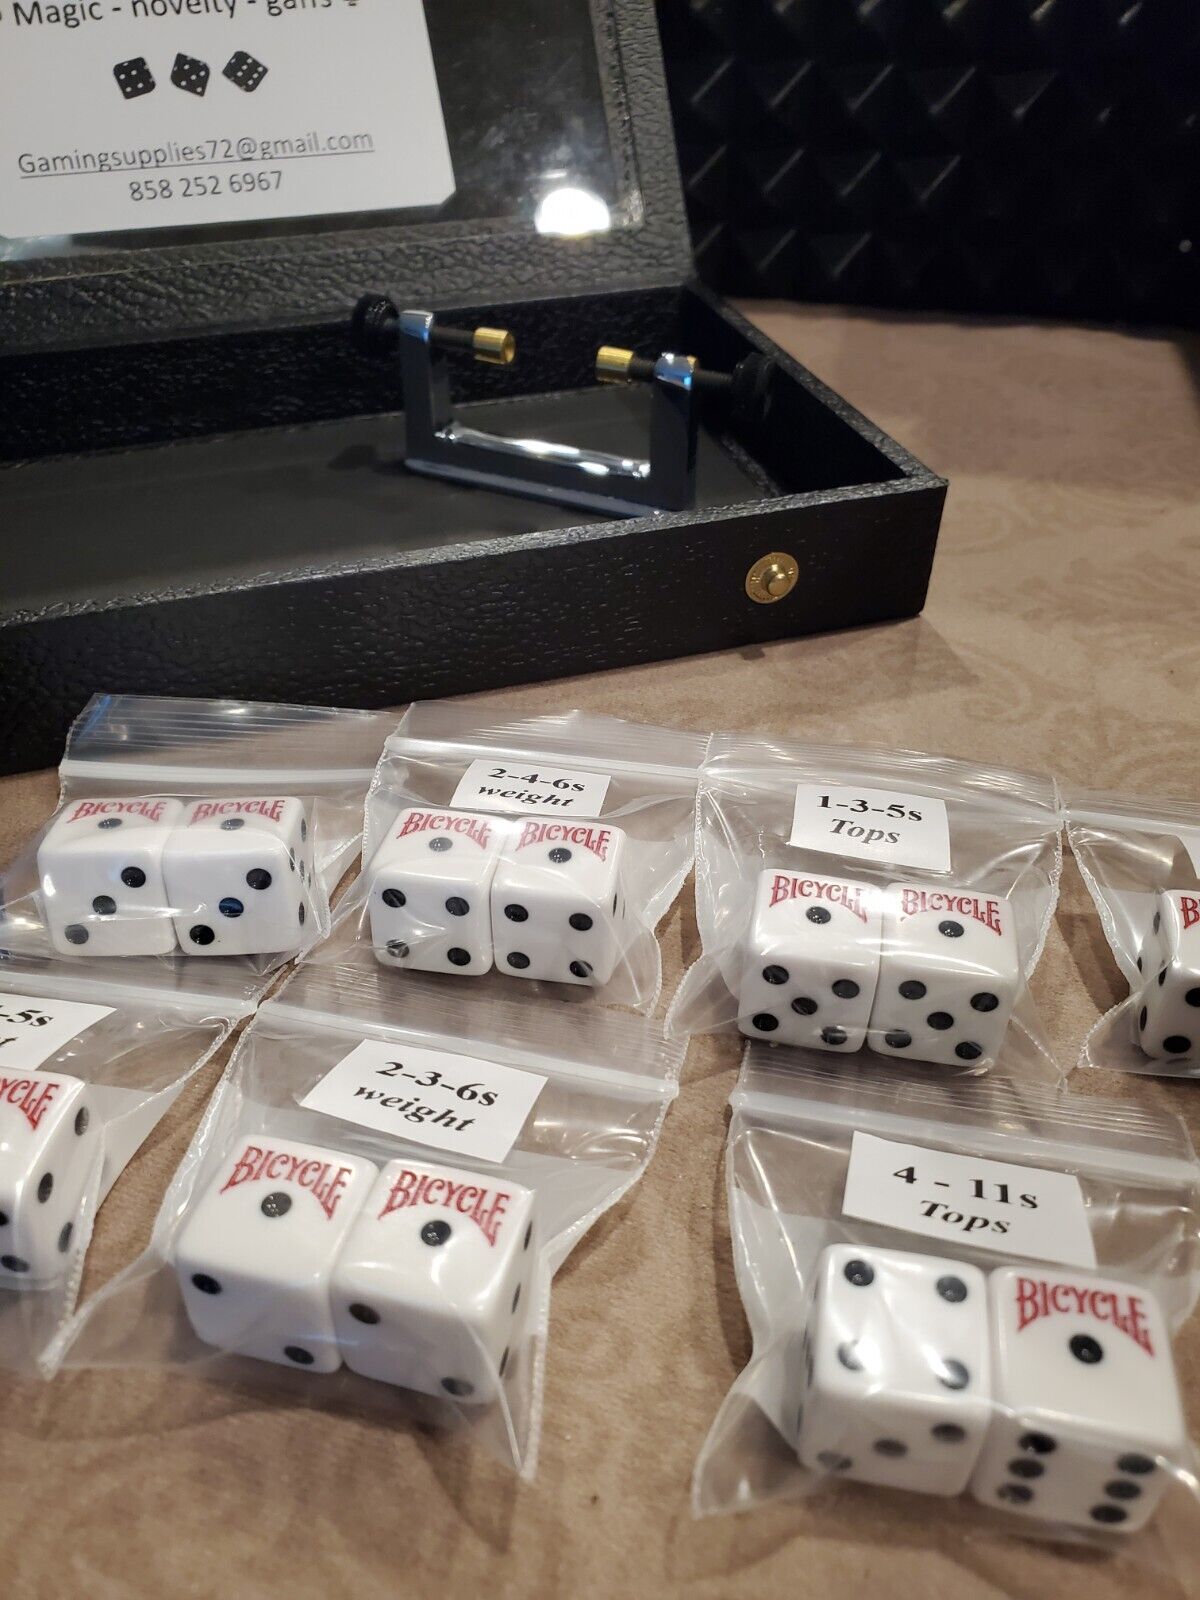 Gaffed dice magician dice trick dice loaded dice weighted dice *FREE SAMPLE*